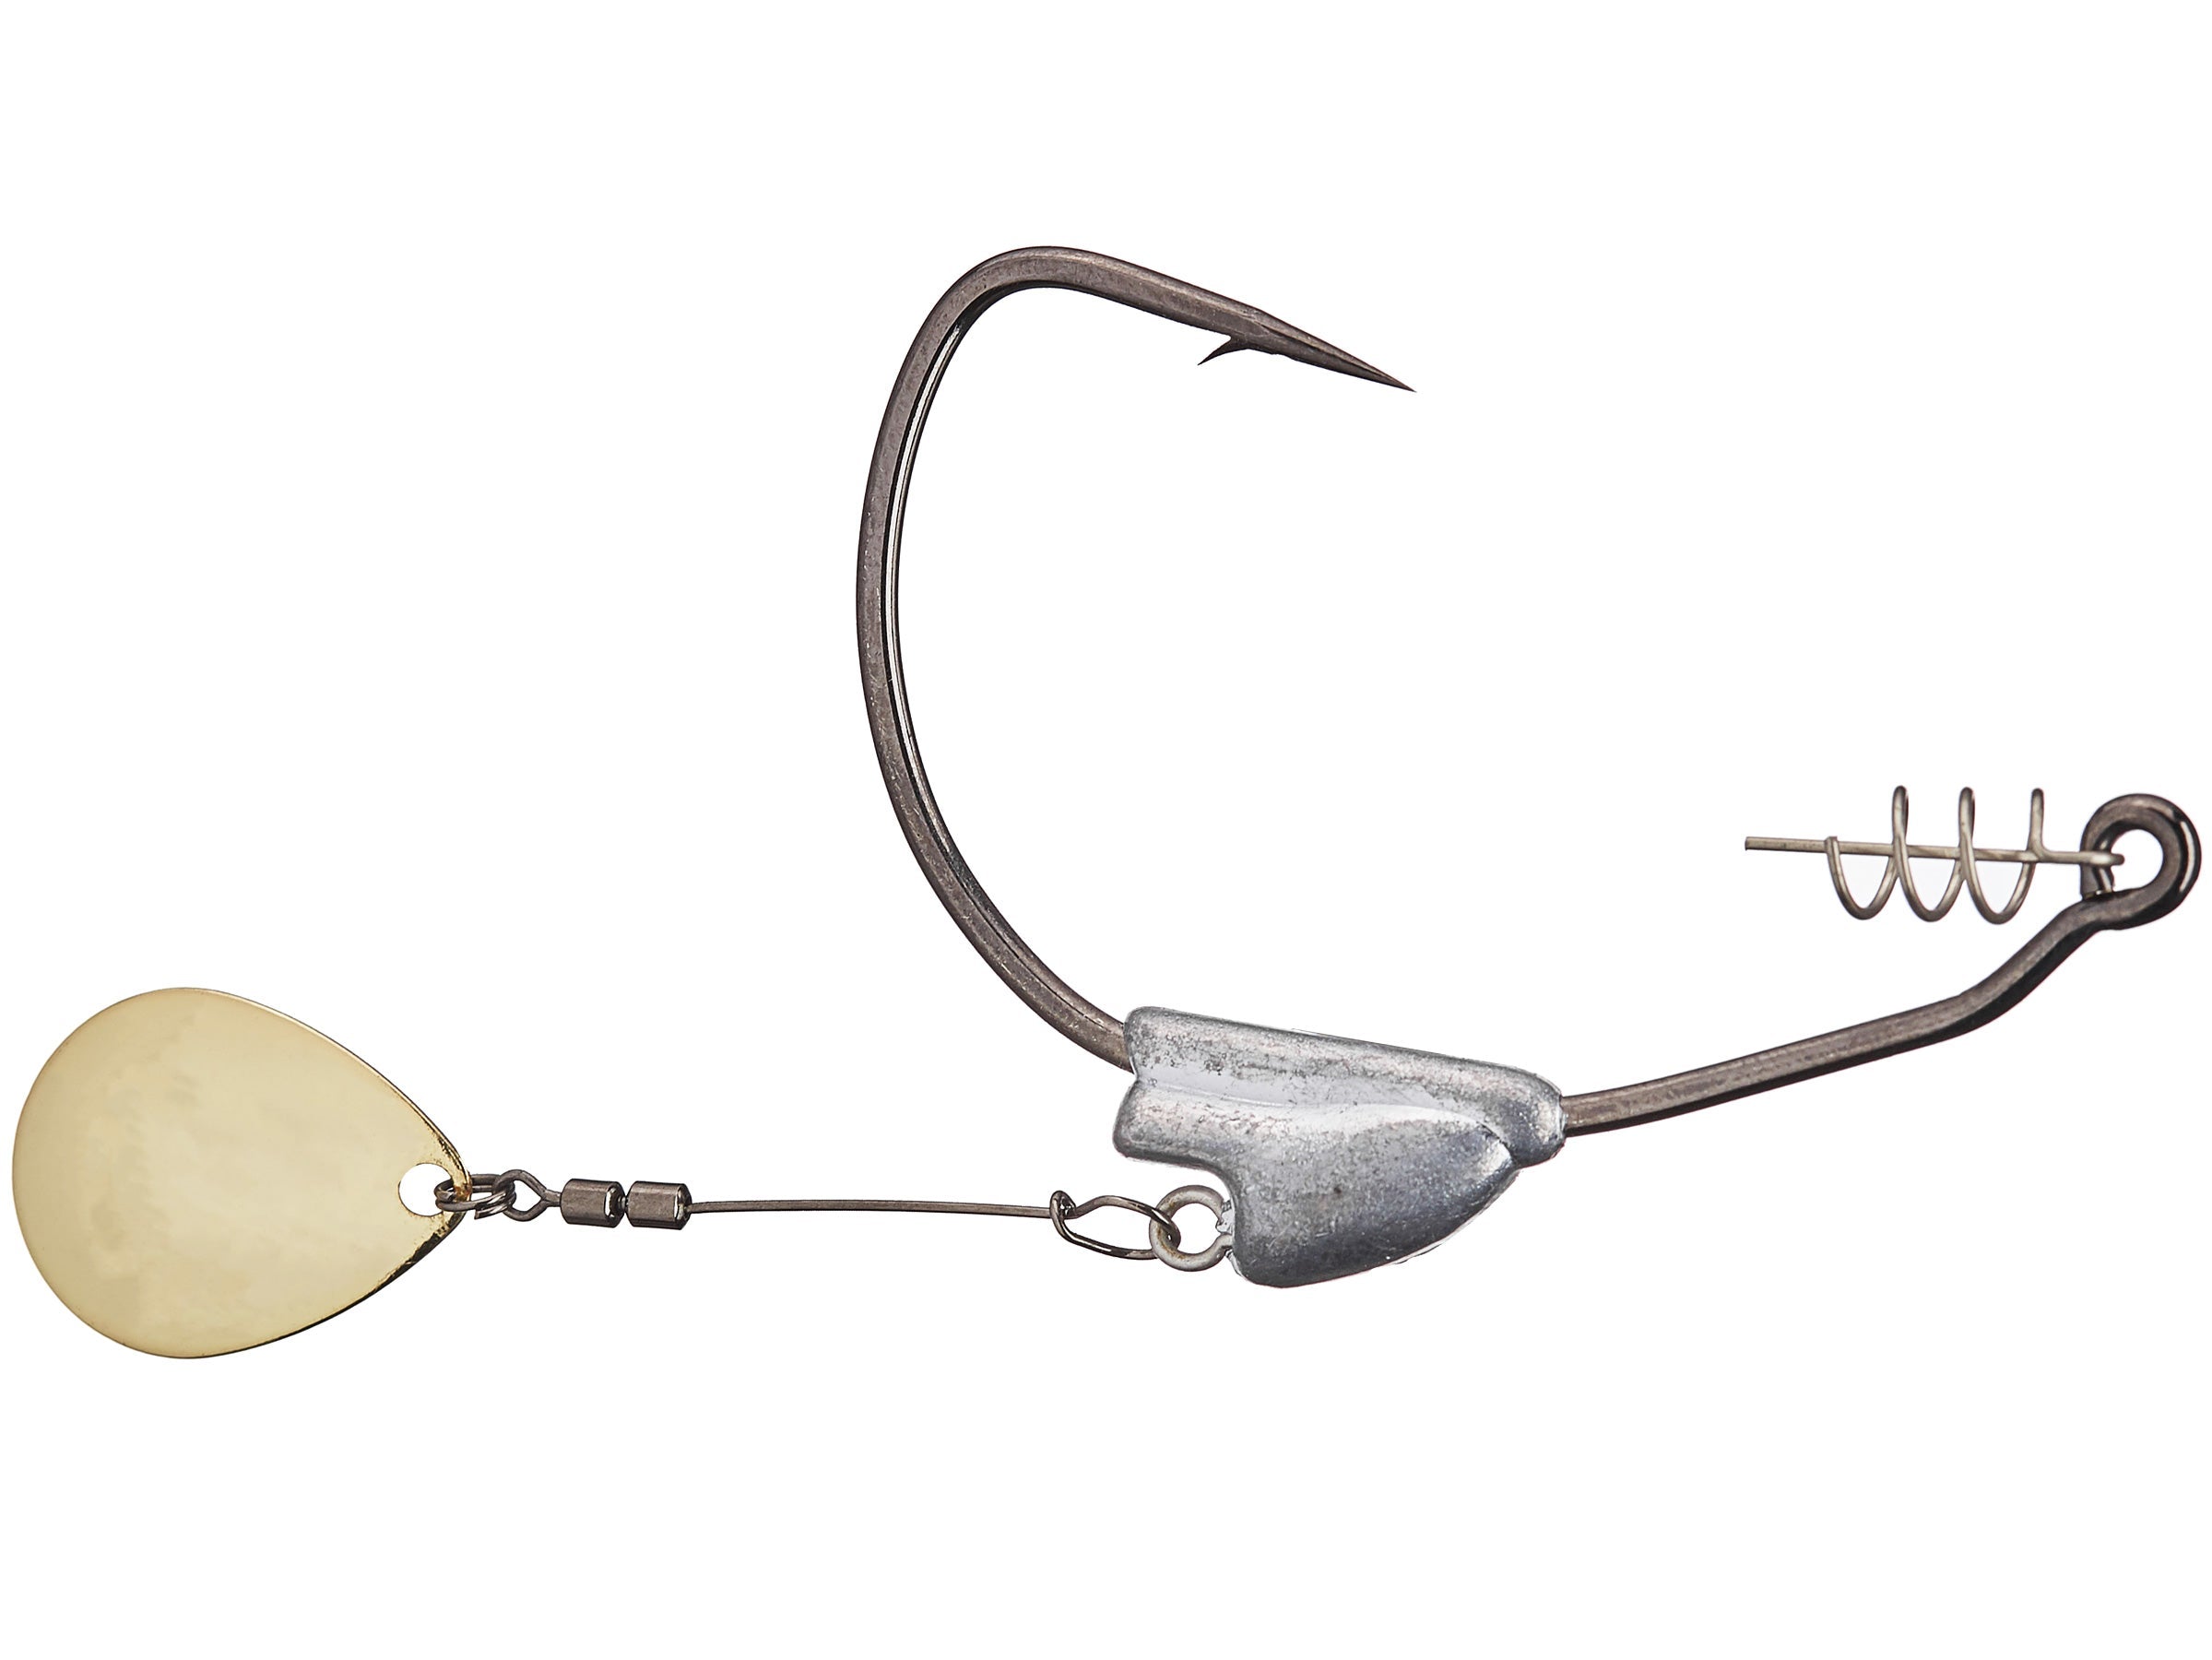 12/0 - 3/4oz Owner Weighted Beast Hooks 2pk.